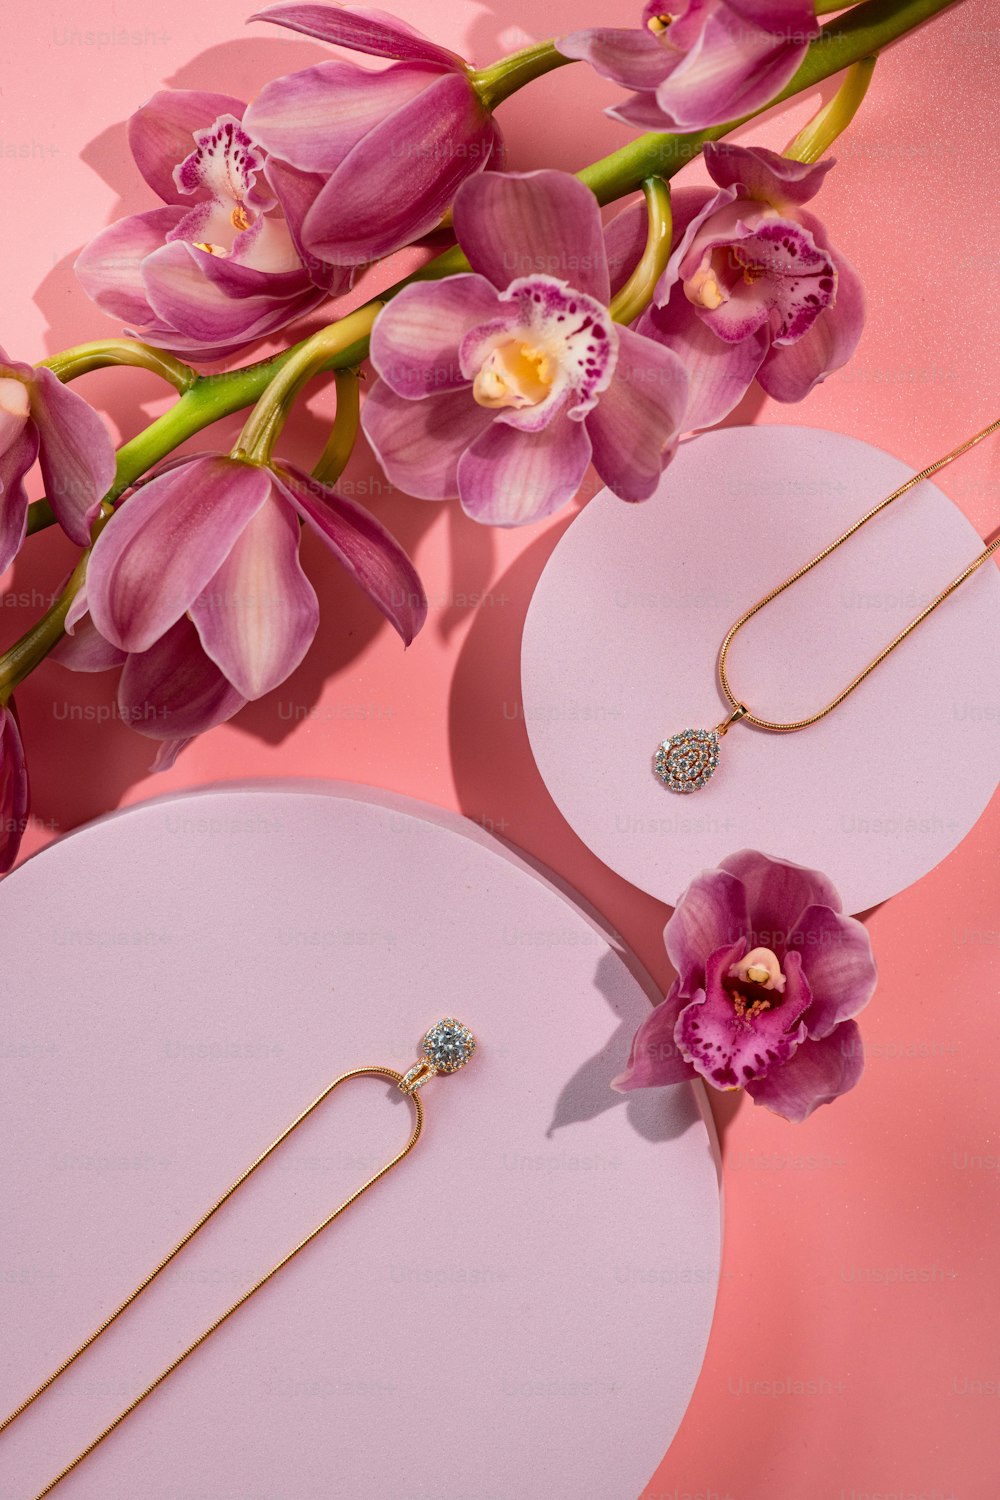 a close up of a pair of earrings on a pink surface